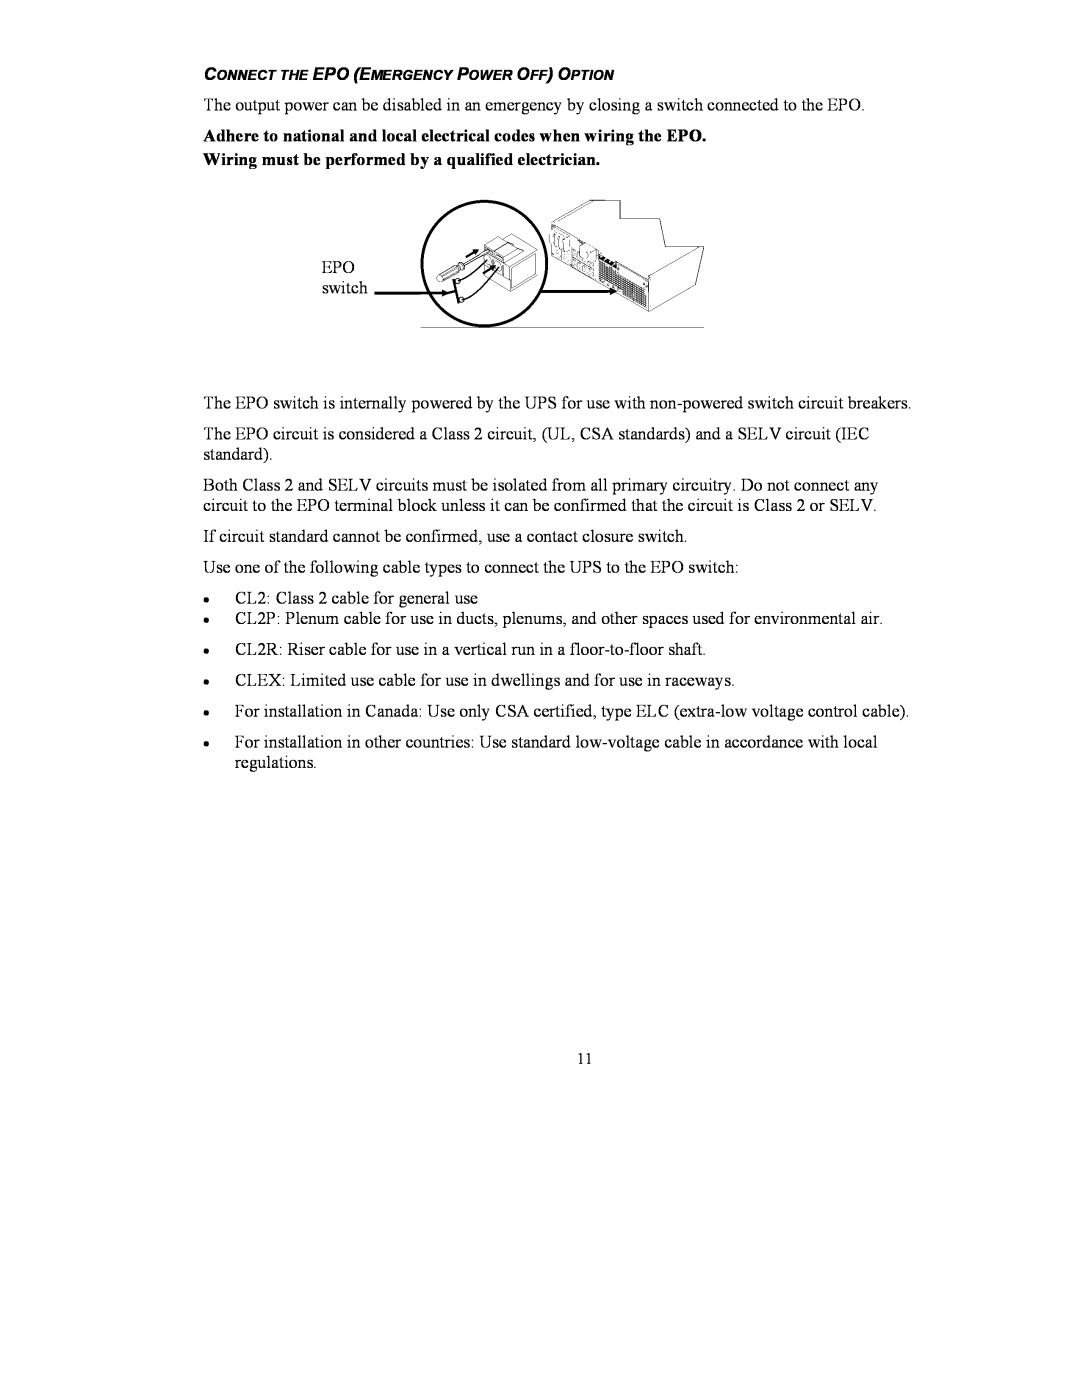 American Power Conversion RT-UXICH user manual Adhere to national and local electrical codes when wiring the EPO 